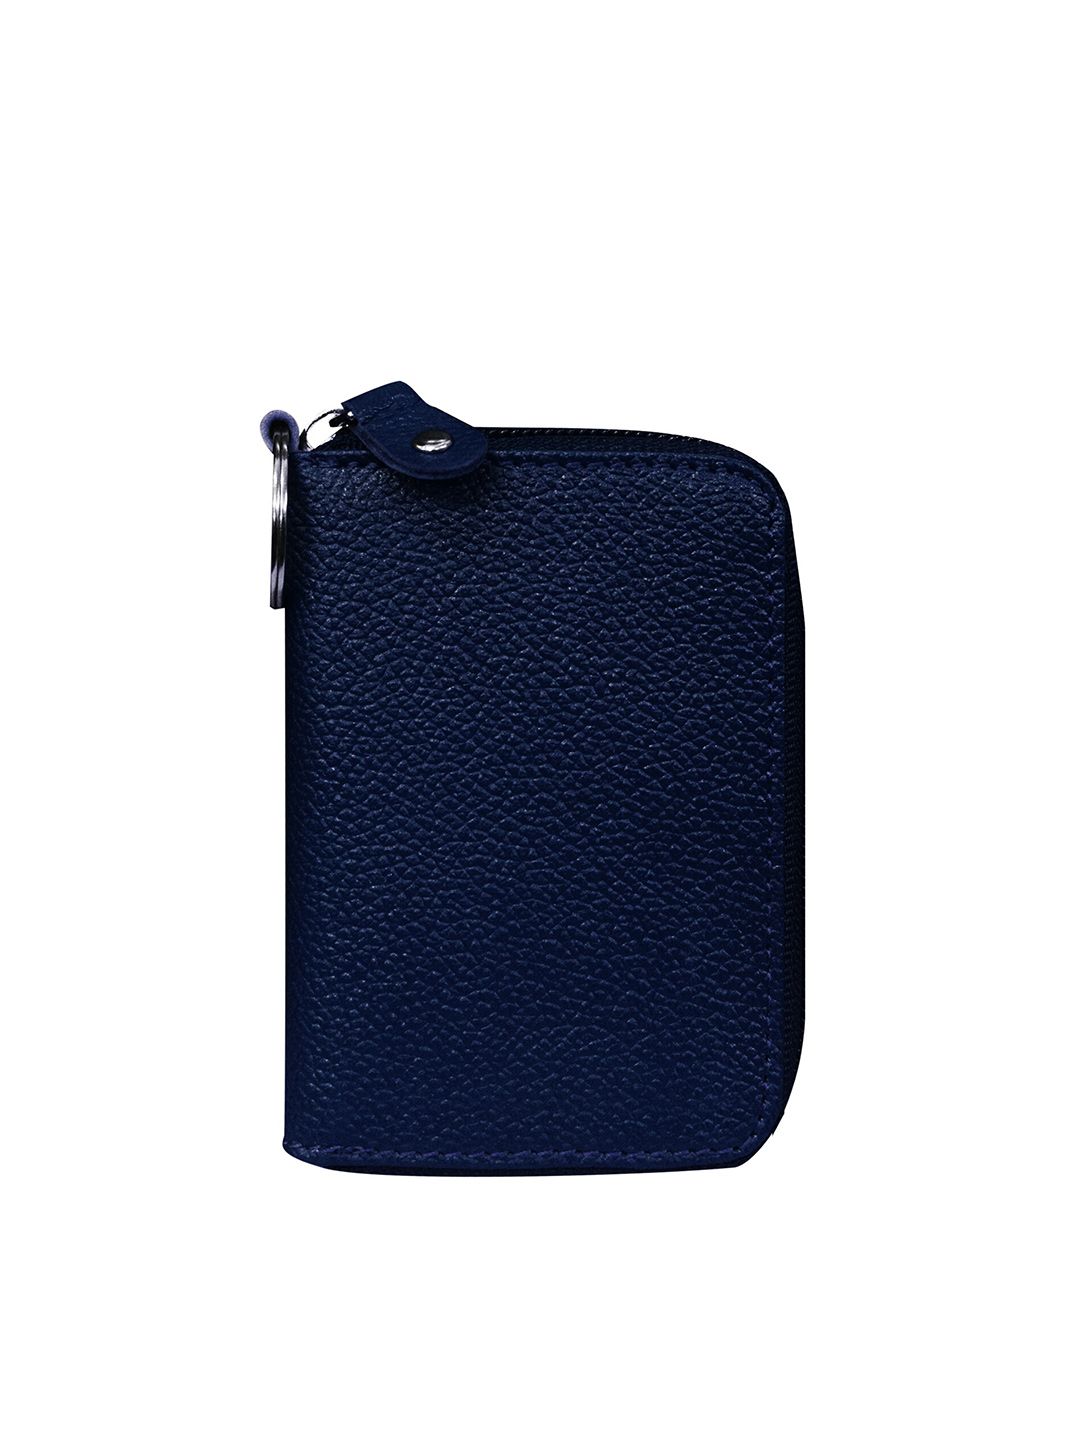 ABYS Blue Leather Card Holder Price in India